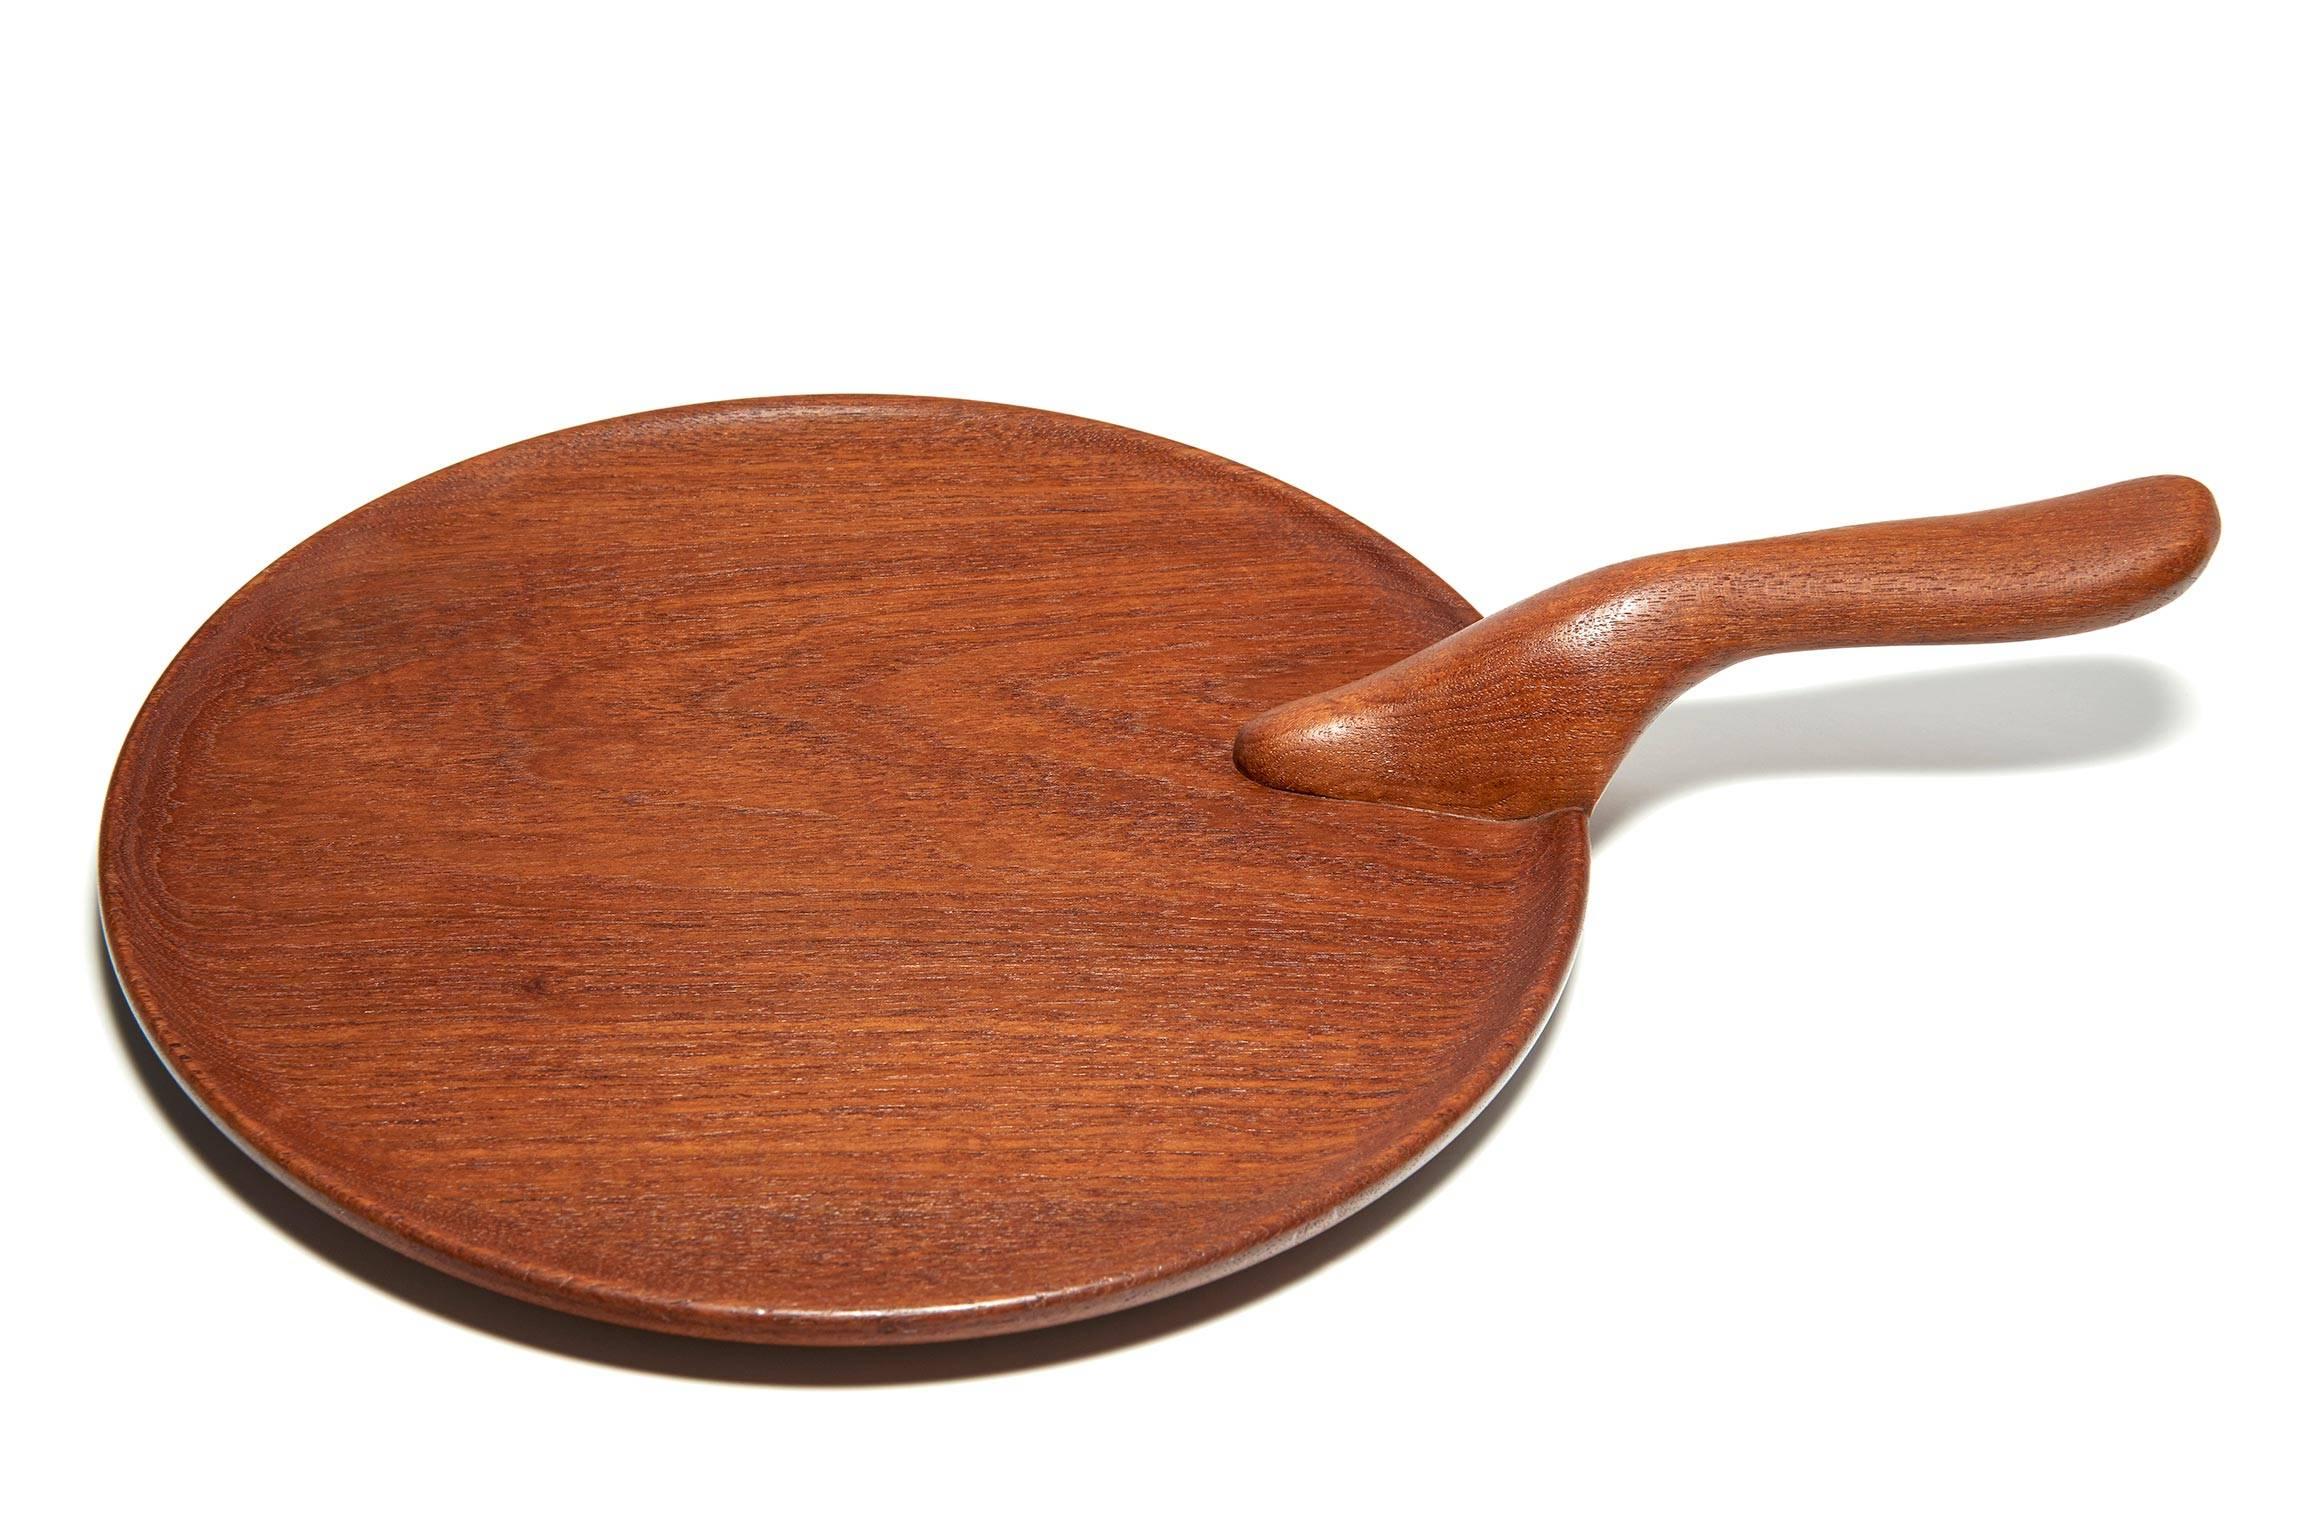 Give a legendary Danish artisan a slab of Siamese teak, and he'll do something wonderful with it. This old Kay Bojesen handled serving tray is distinguished by a beautifully formed and carved handle that makes it a tactile delight to carry around as